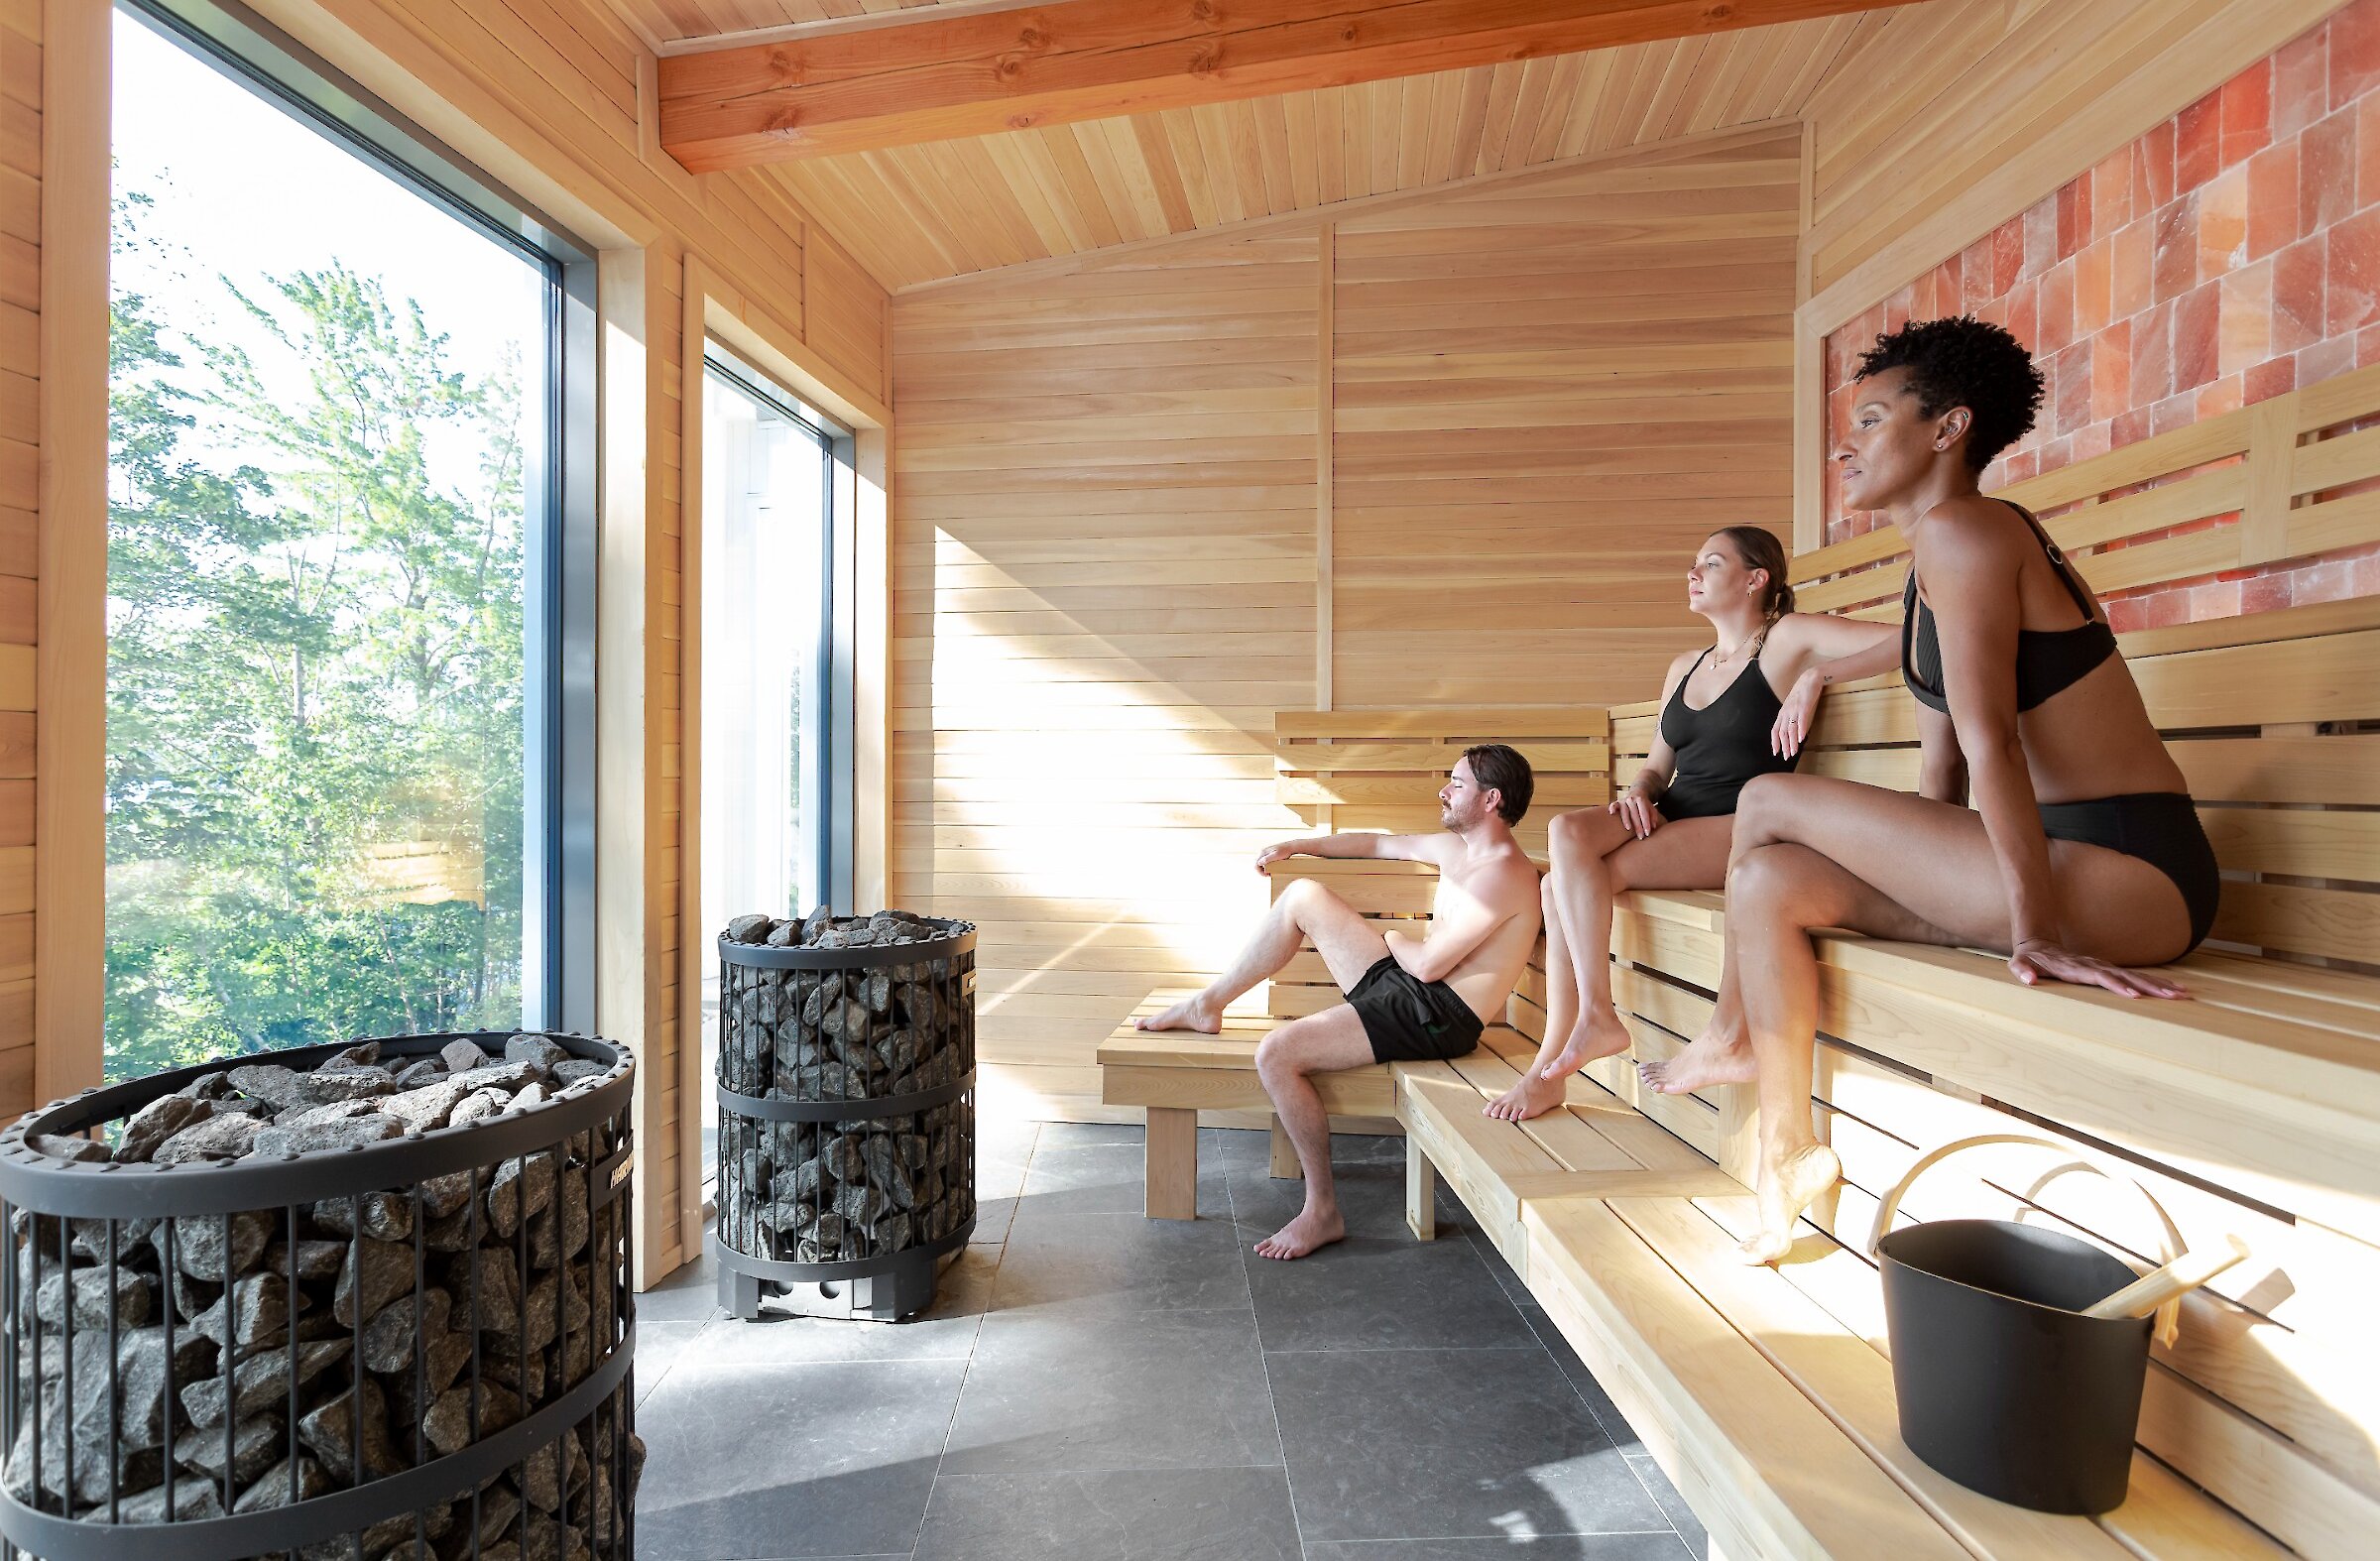 Three people enjoy the sauna overlooking the forest and lake